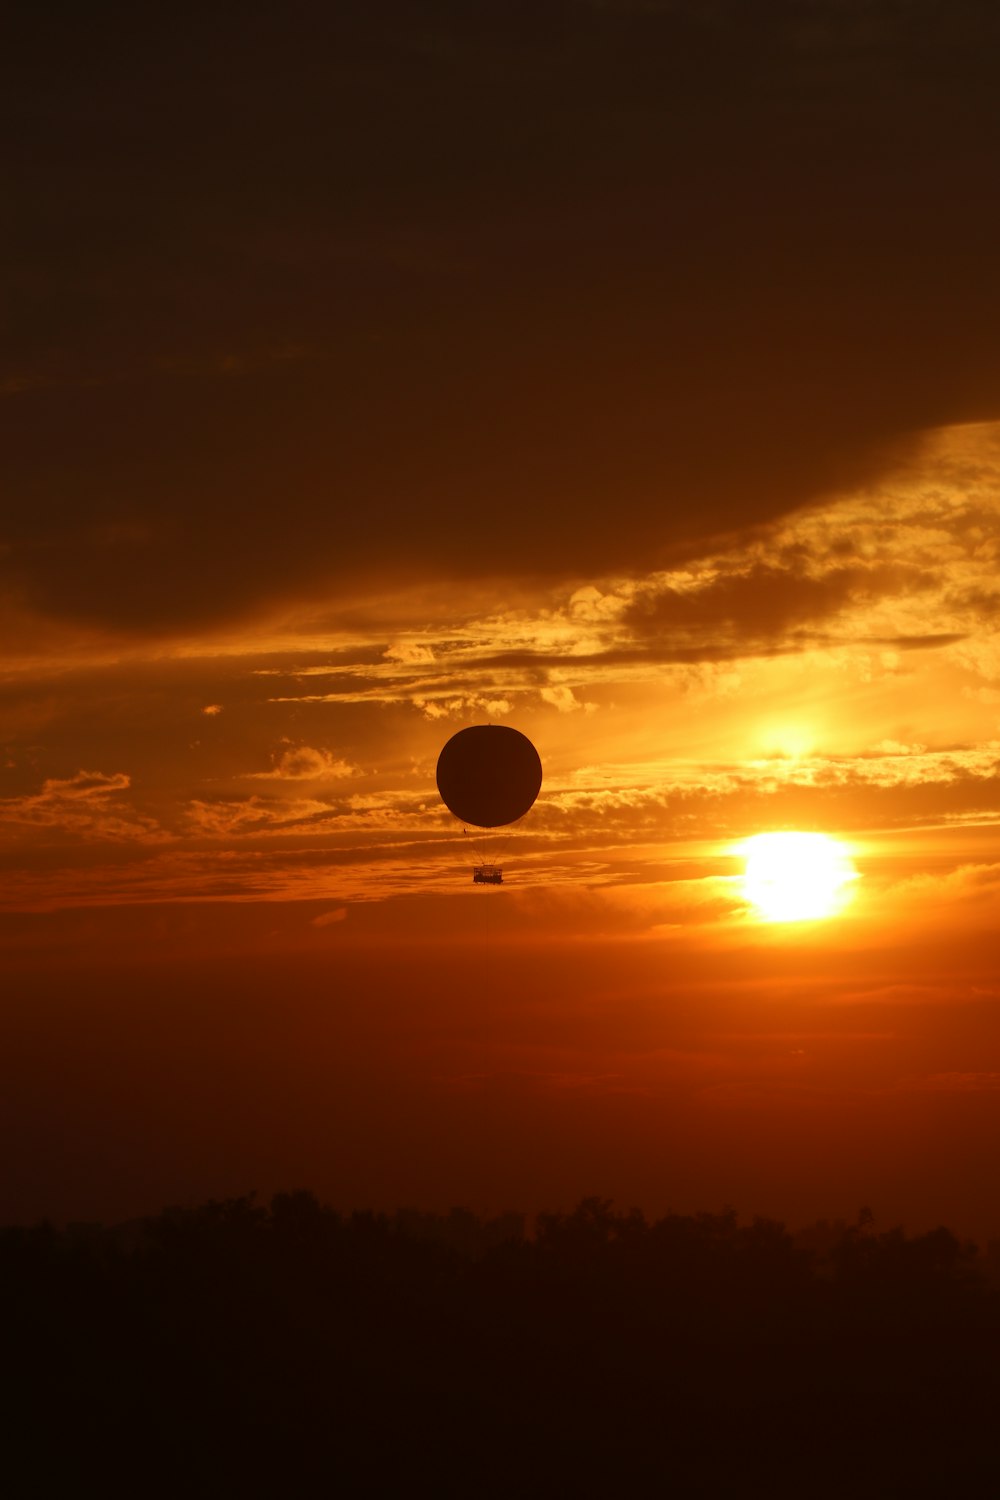 a hot air balloon flying in the sky at sunset